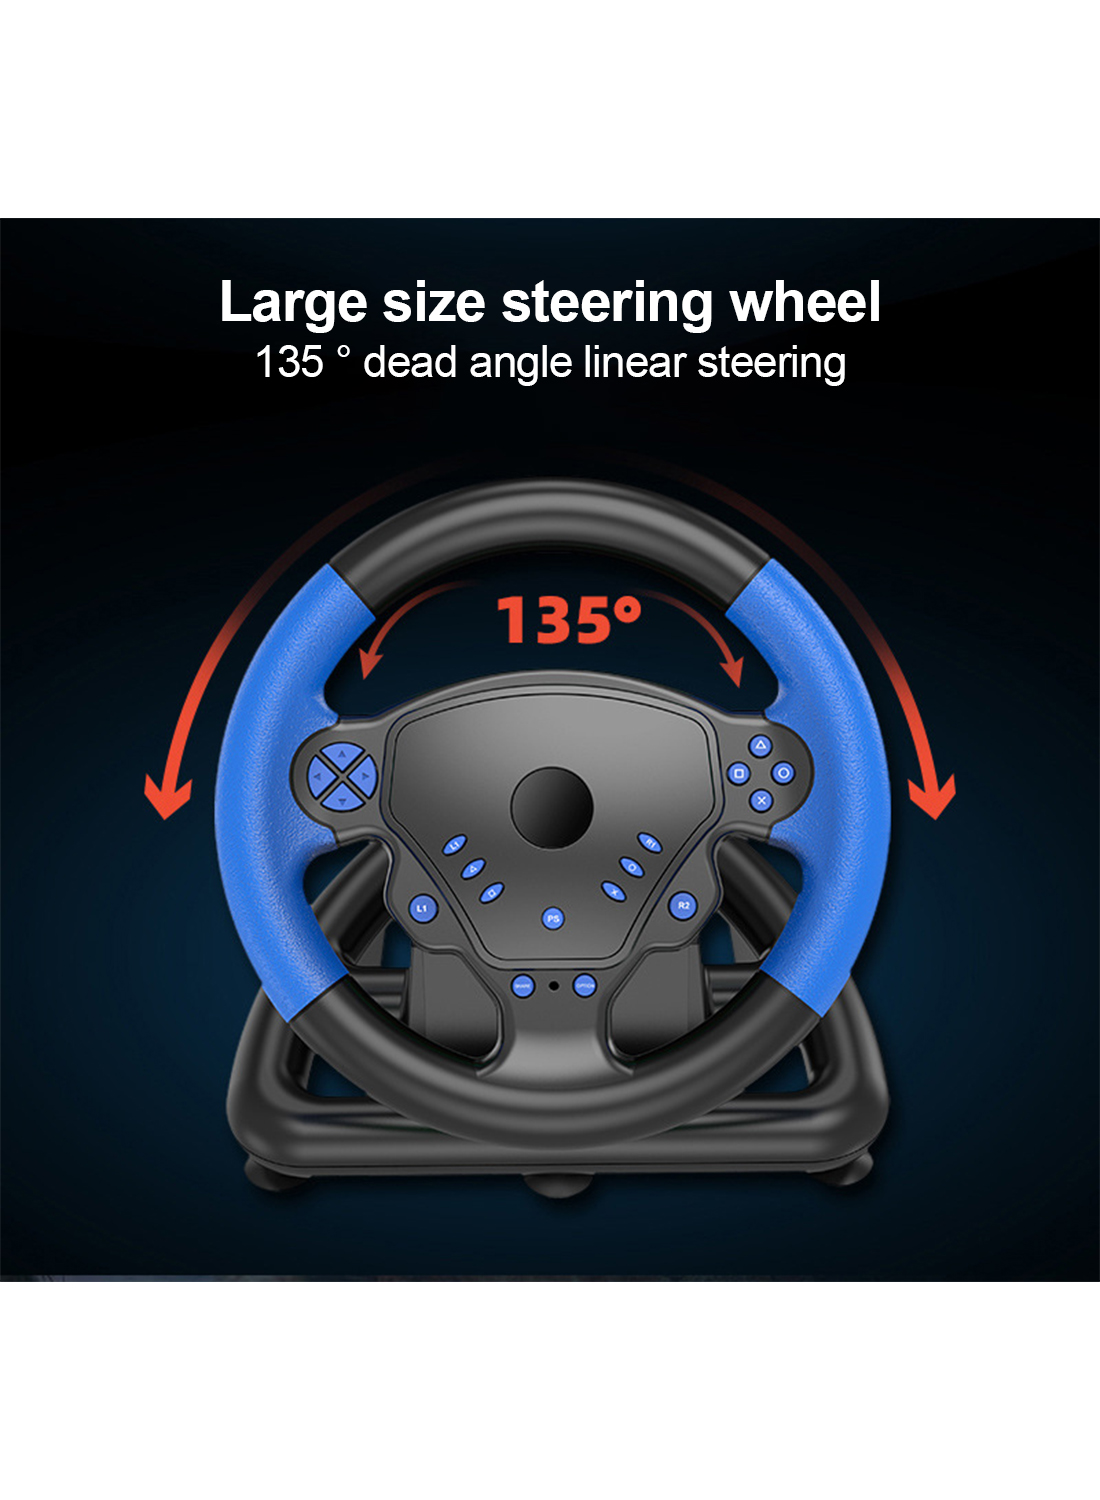 180 Degree Gaming Steering Wheel with Pedals and Gear Lever Supports wired or Bluetooth Connection for PS4/PS3/Pc/Android/IOS